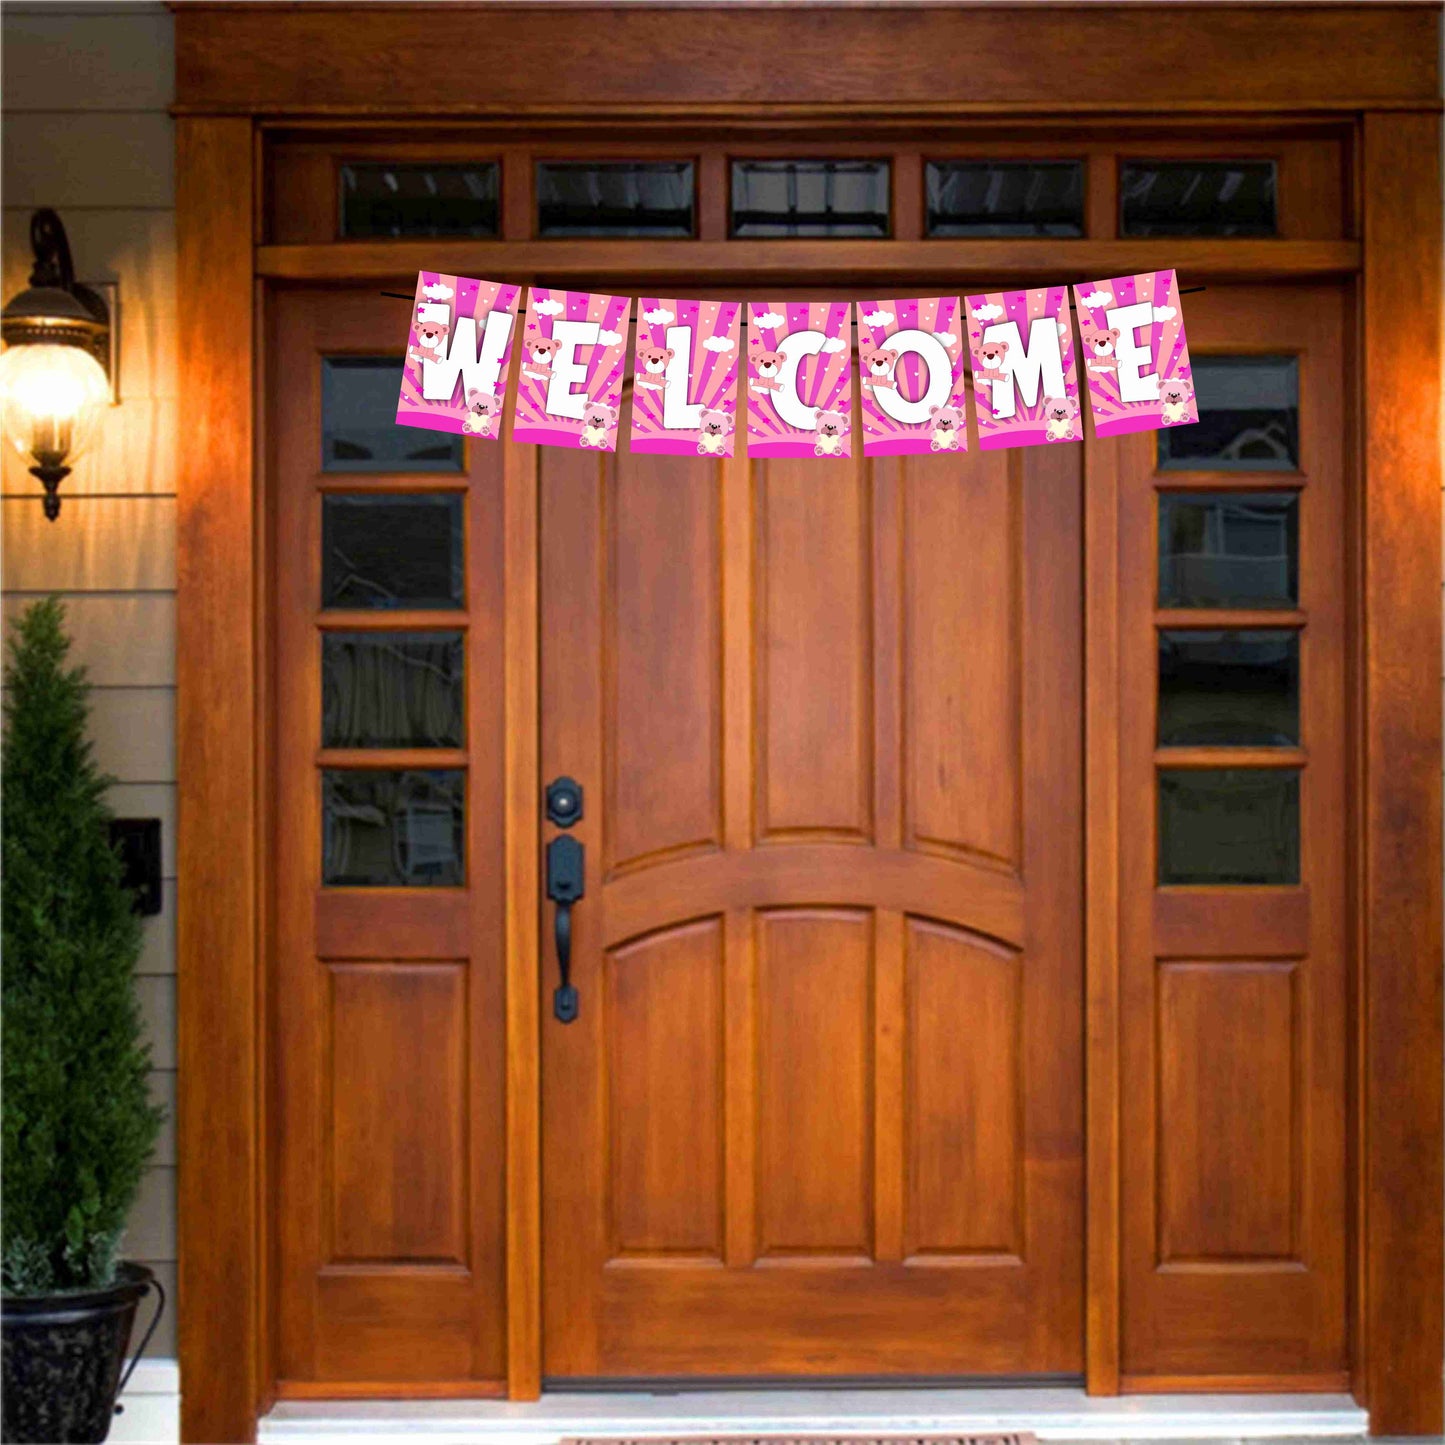 Pink Teddy Bear Welcome Banner for Party Entrance Home Welcoming Birthday Decoration Party Item